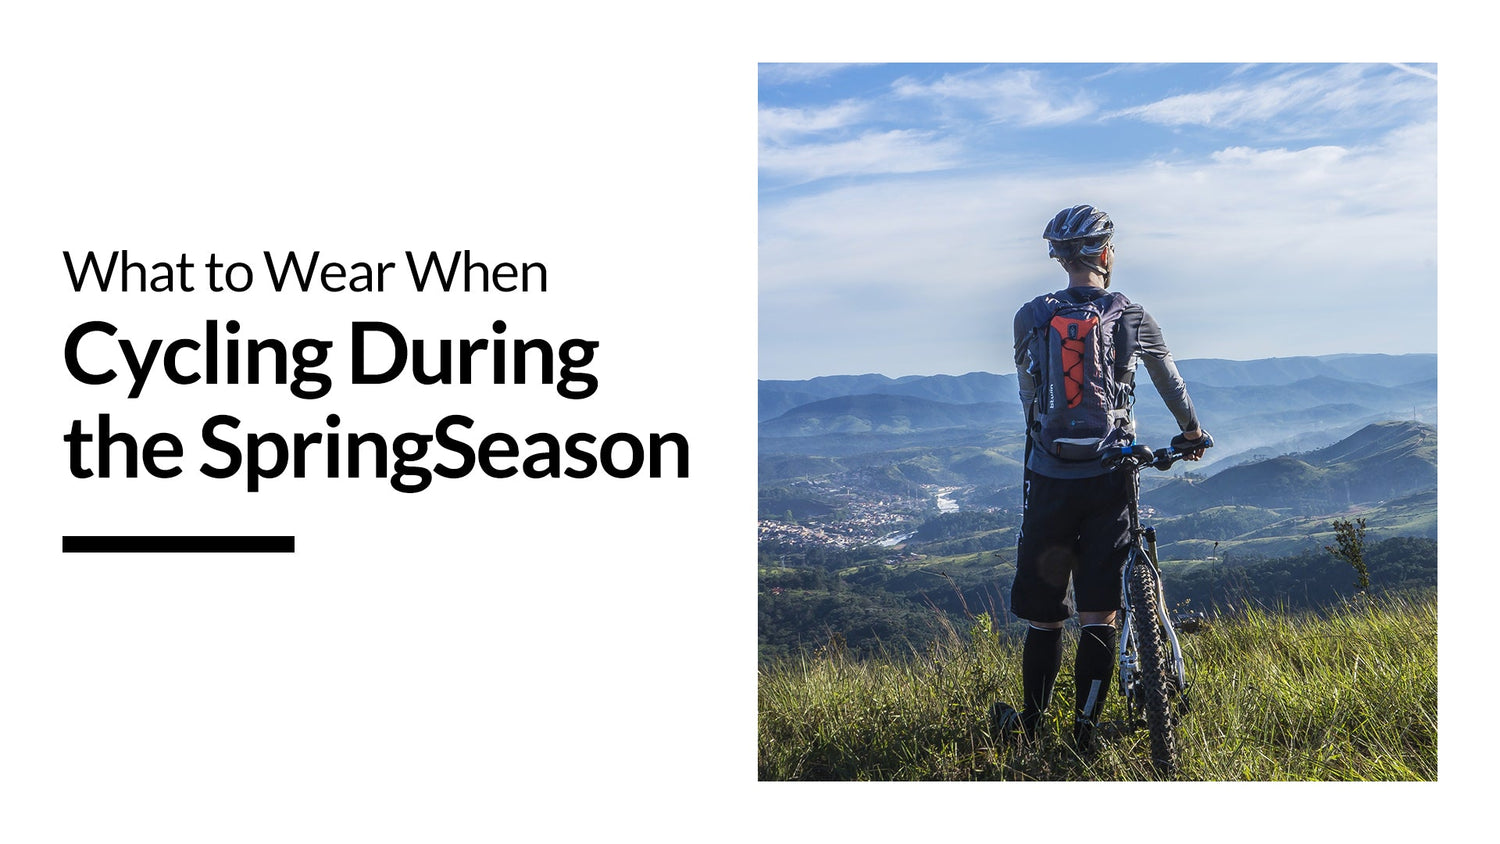 What to Wear When Cycling During the SpringSeason